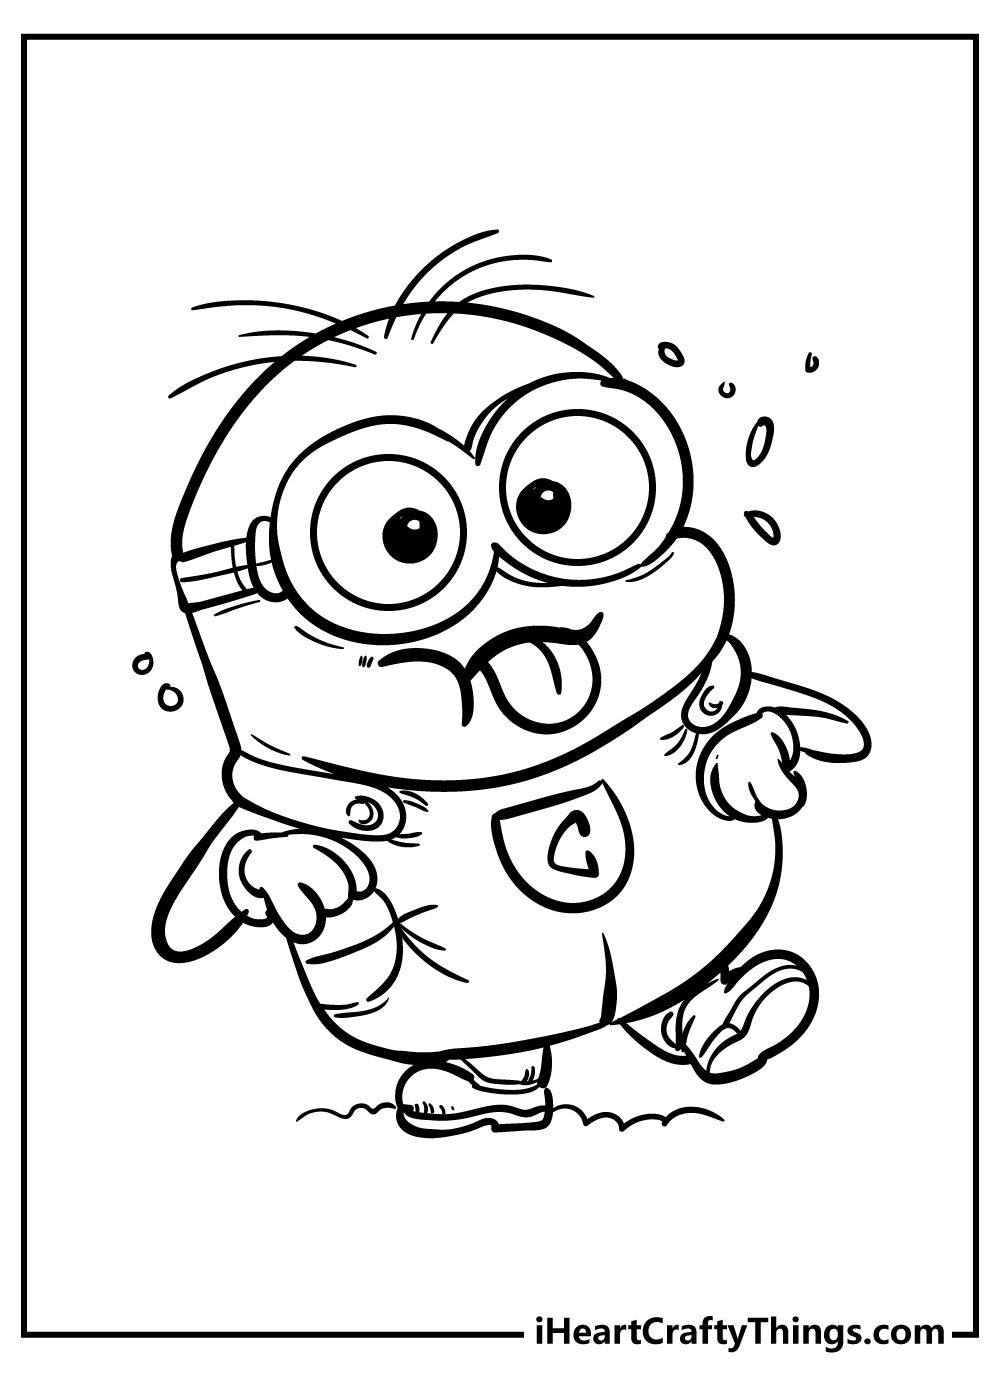 Minions coloring pages in minion coloring pages minions coloring pages coloring pages